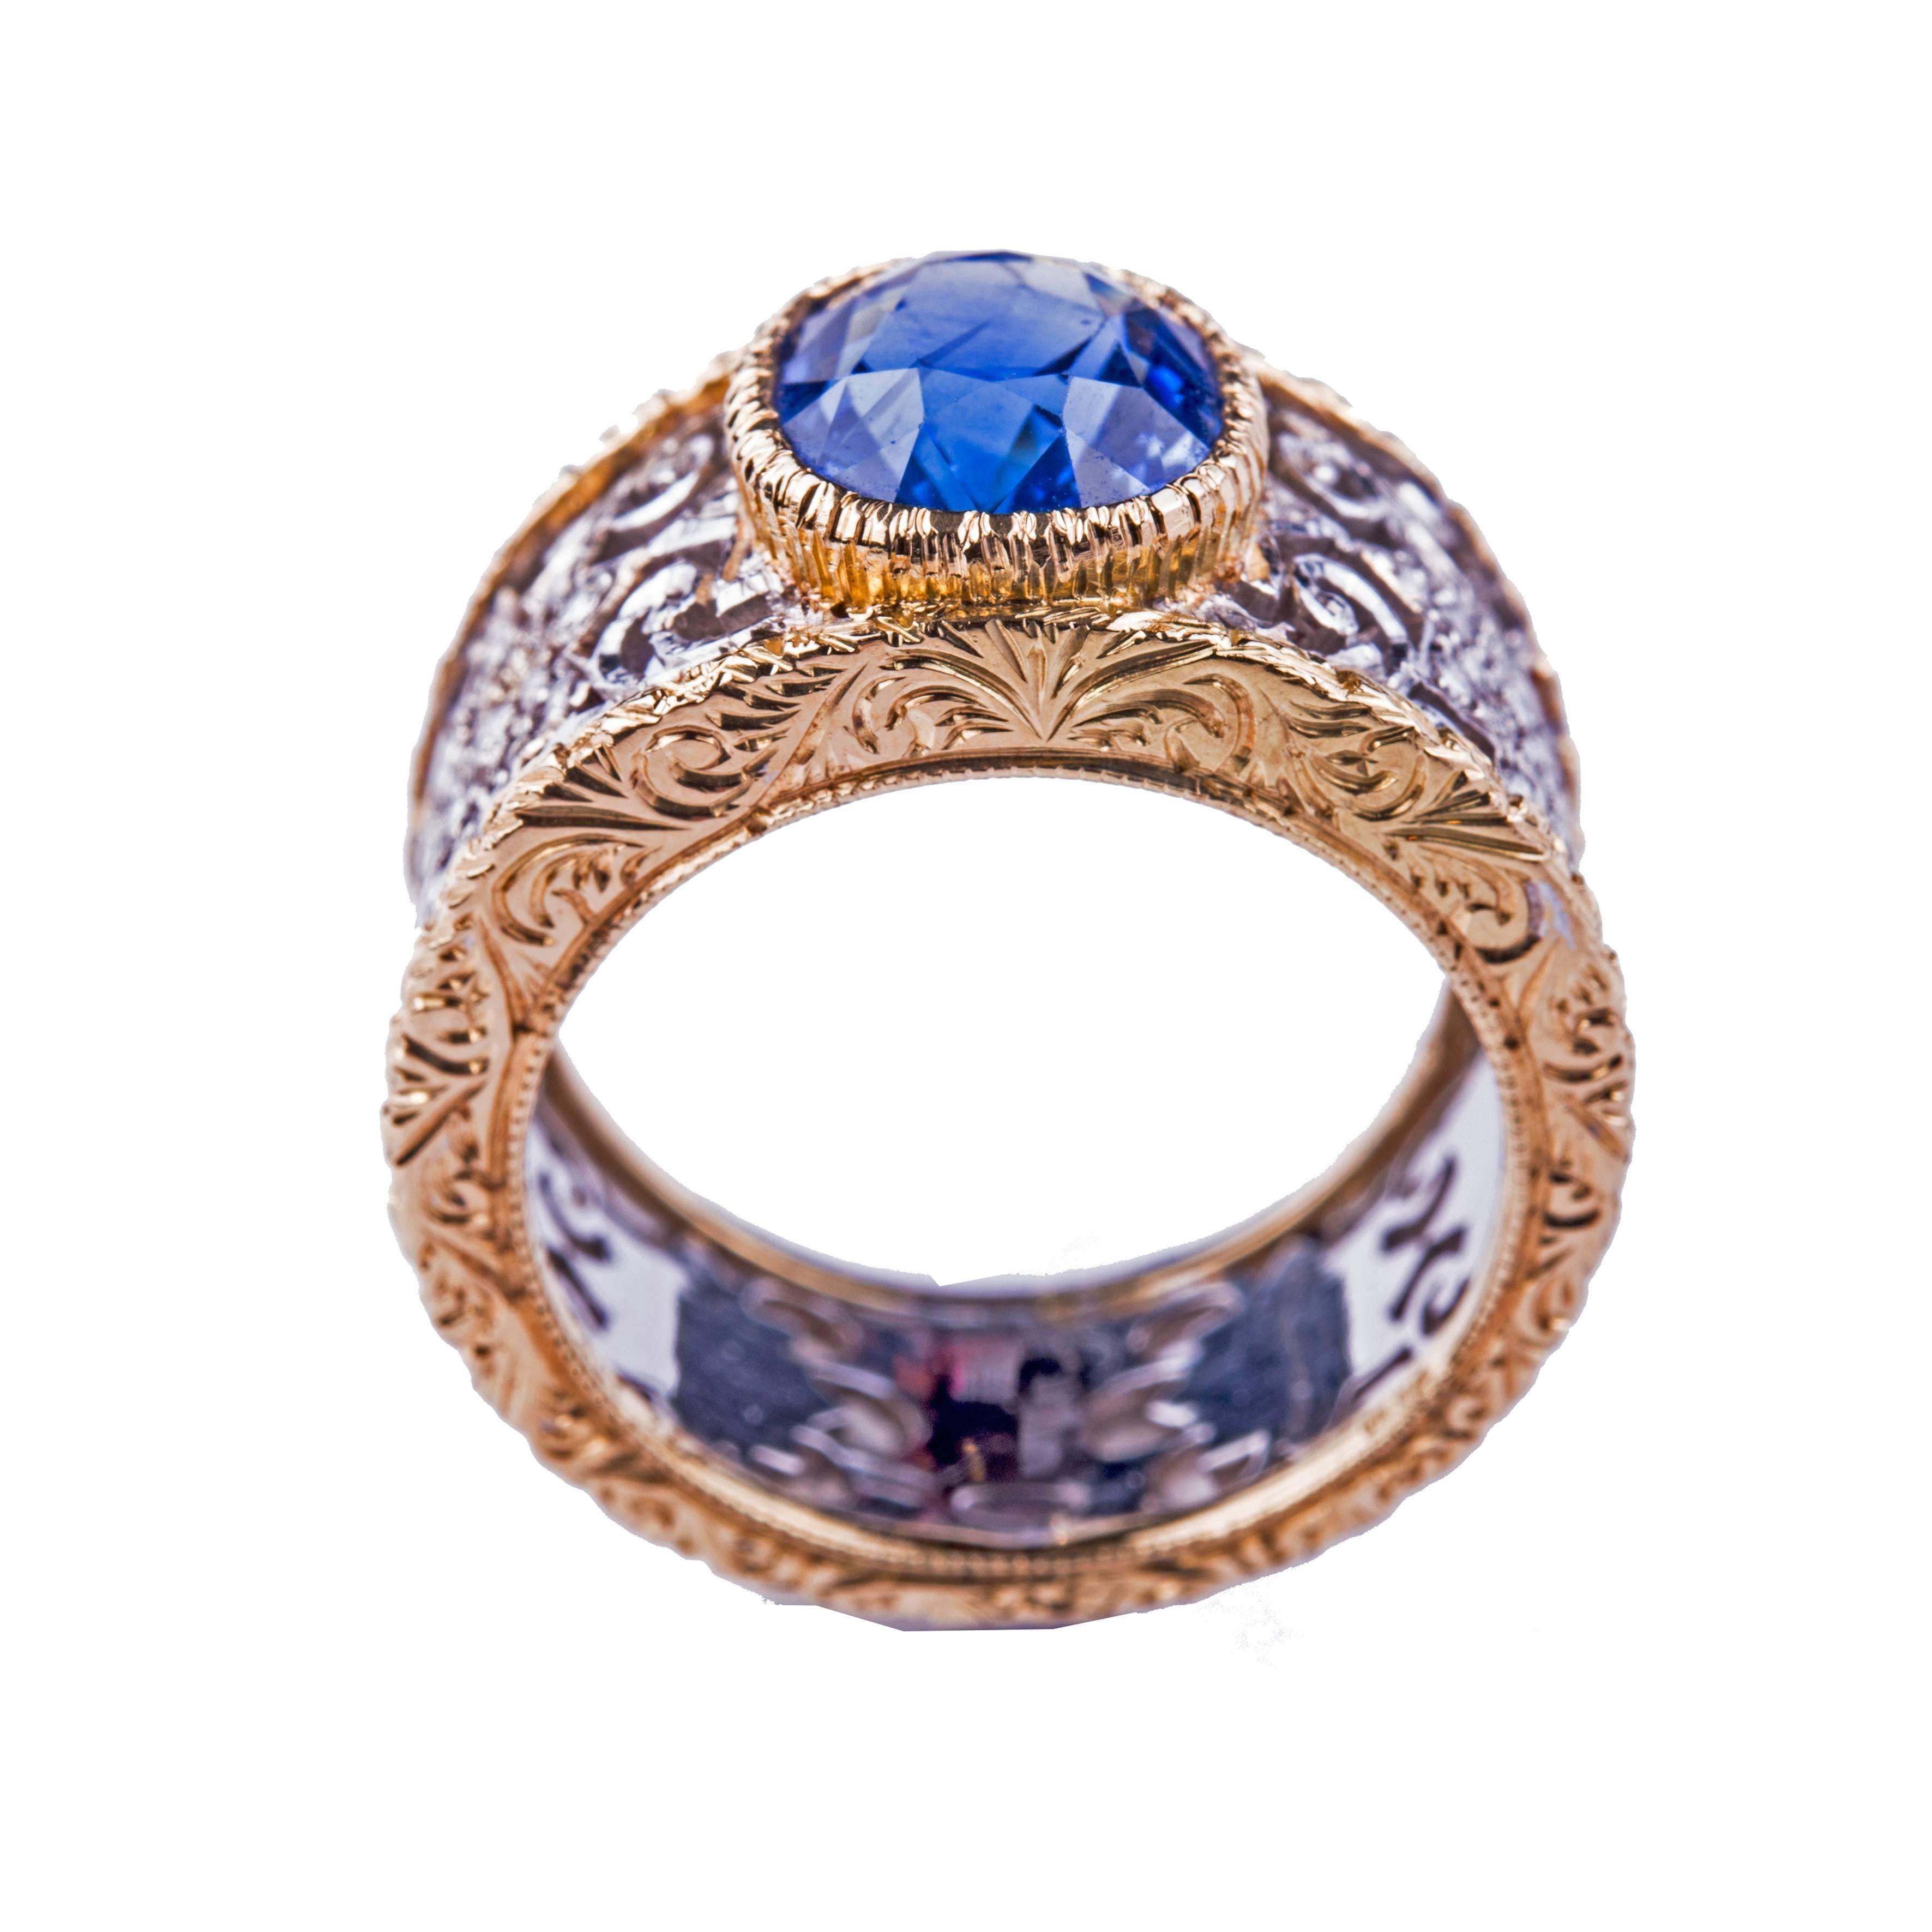 Buccellati signed Ring with Diamonds and Central Blue Sapphire - Gubelin 4ct NOHEAT Sapphire Cert.